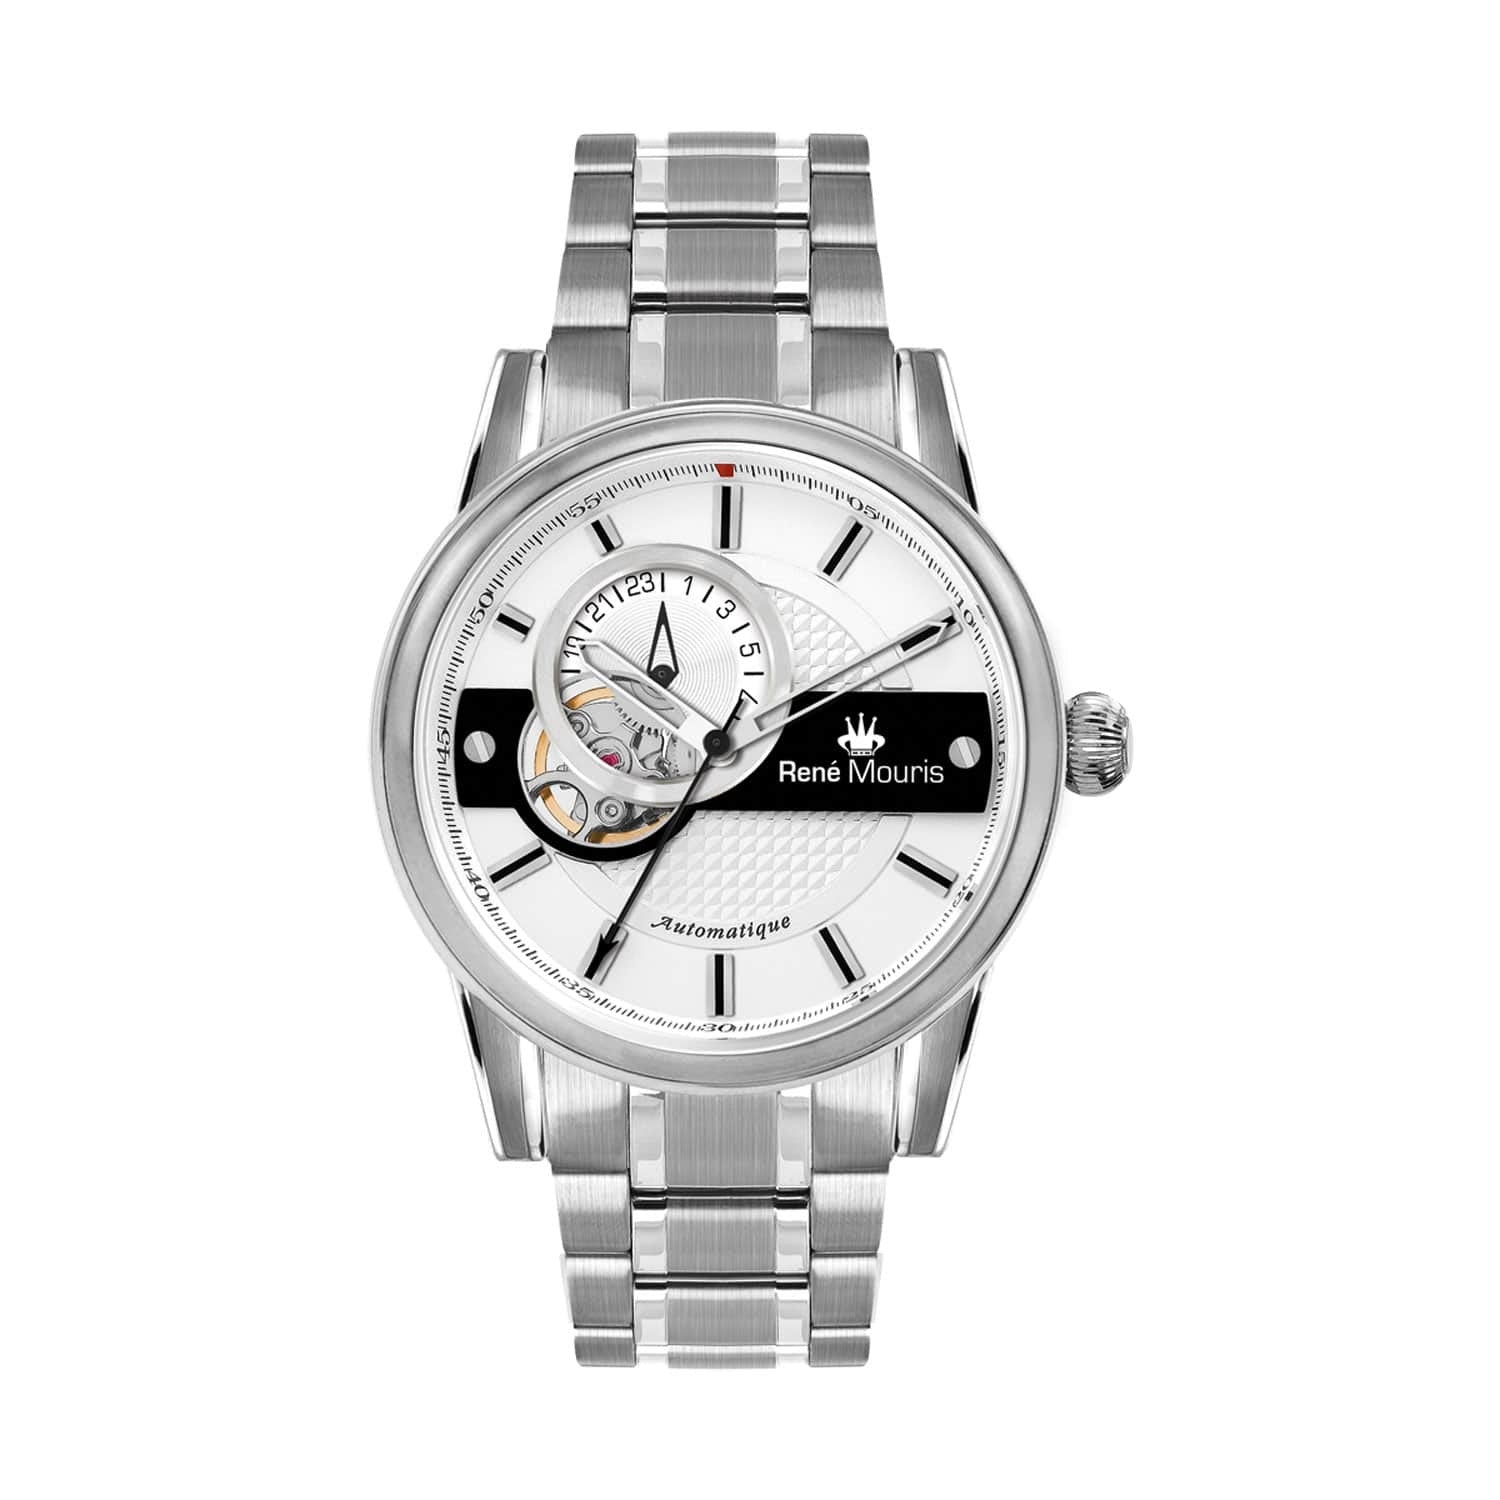 RENE MOURIS Orion Series Automatic Watch Gents